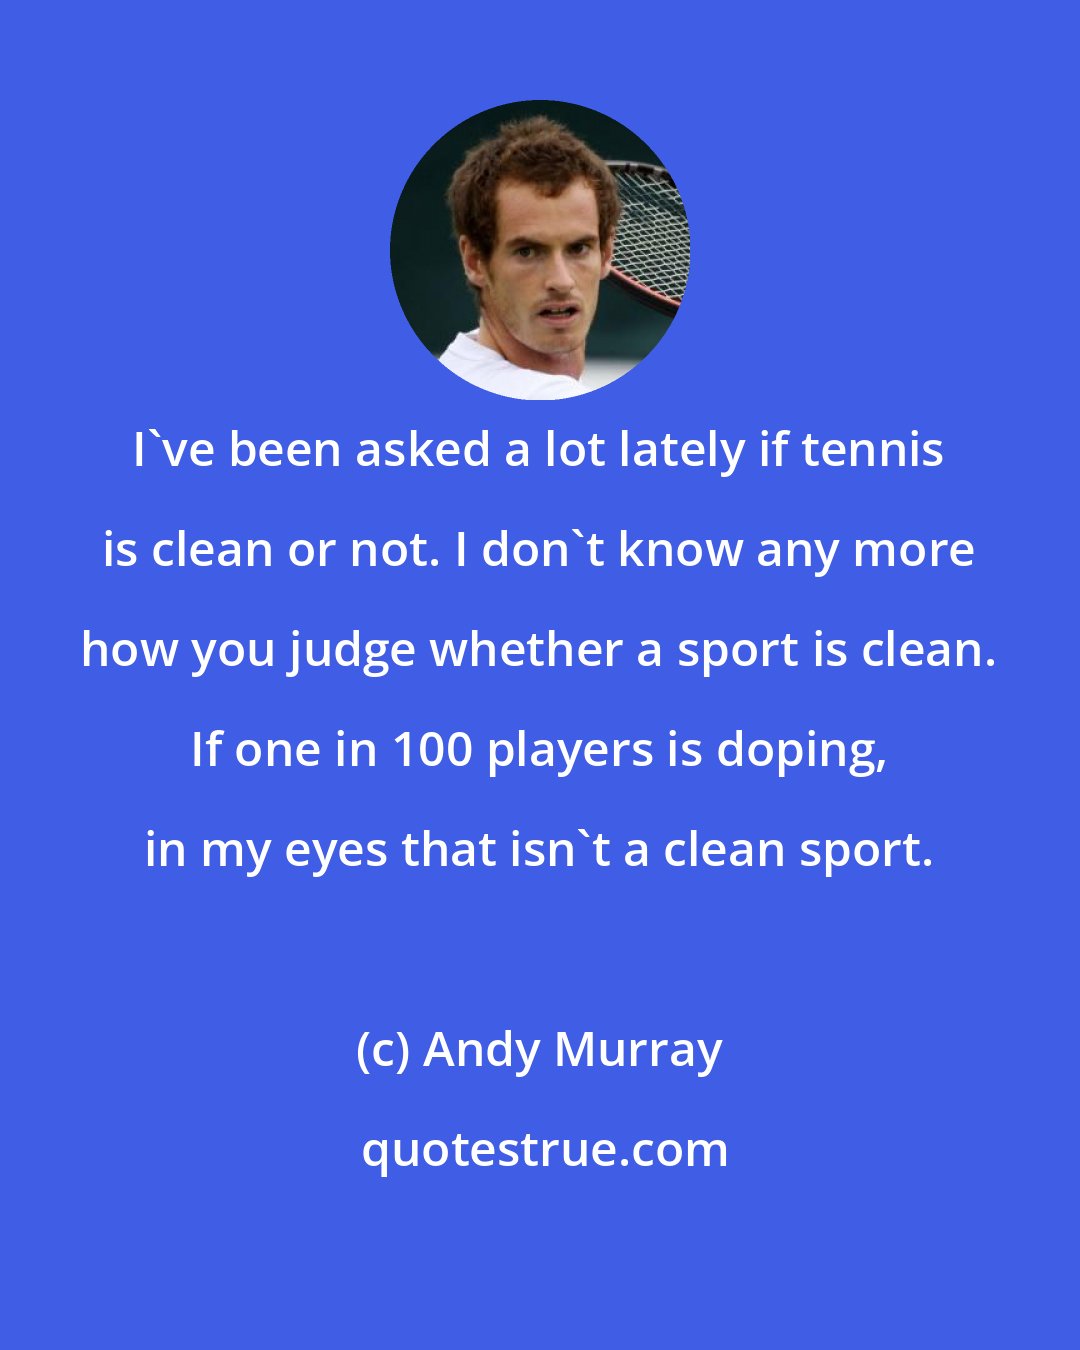 Andy Murray: I've been asked a lot lately if tennis is clean or not. I don't know any more how you judge whether a sport is clean. If one in 100 players is doping, in my eyes that isn't a clean sport.